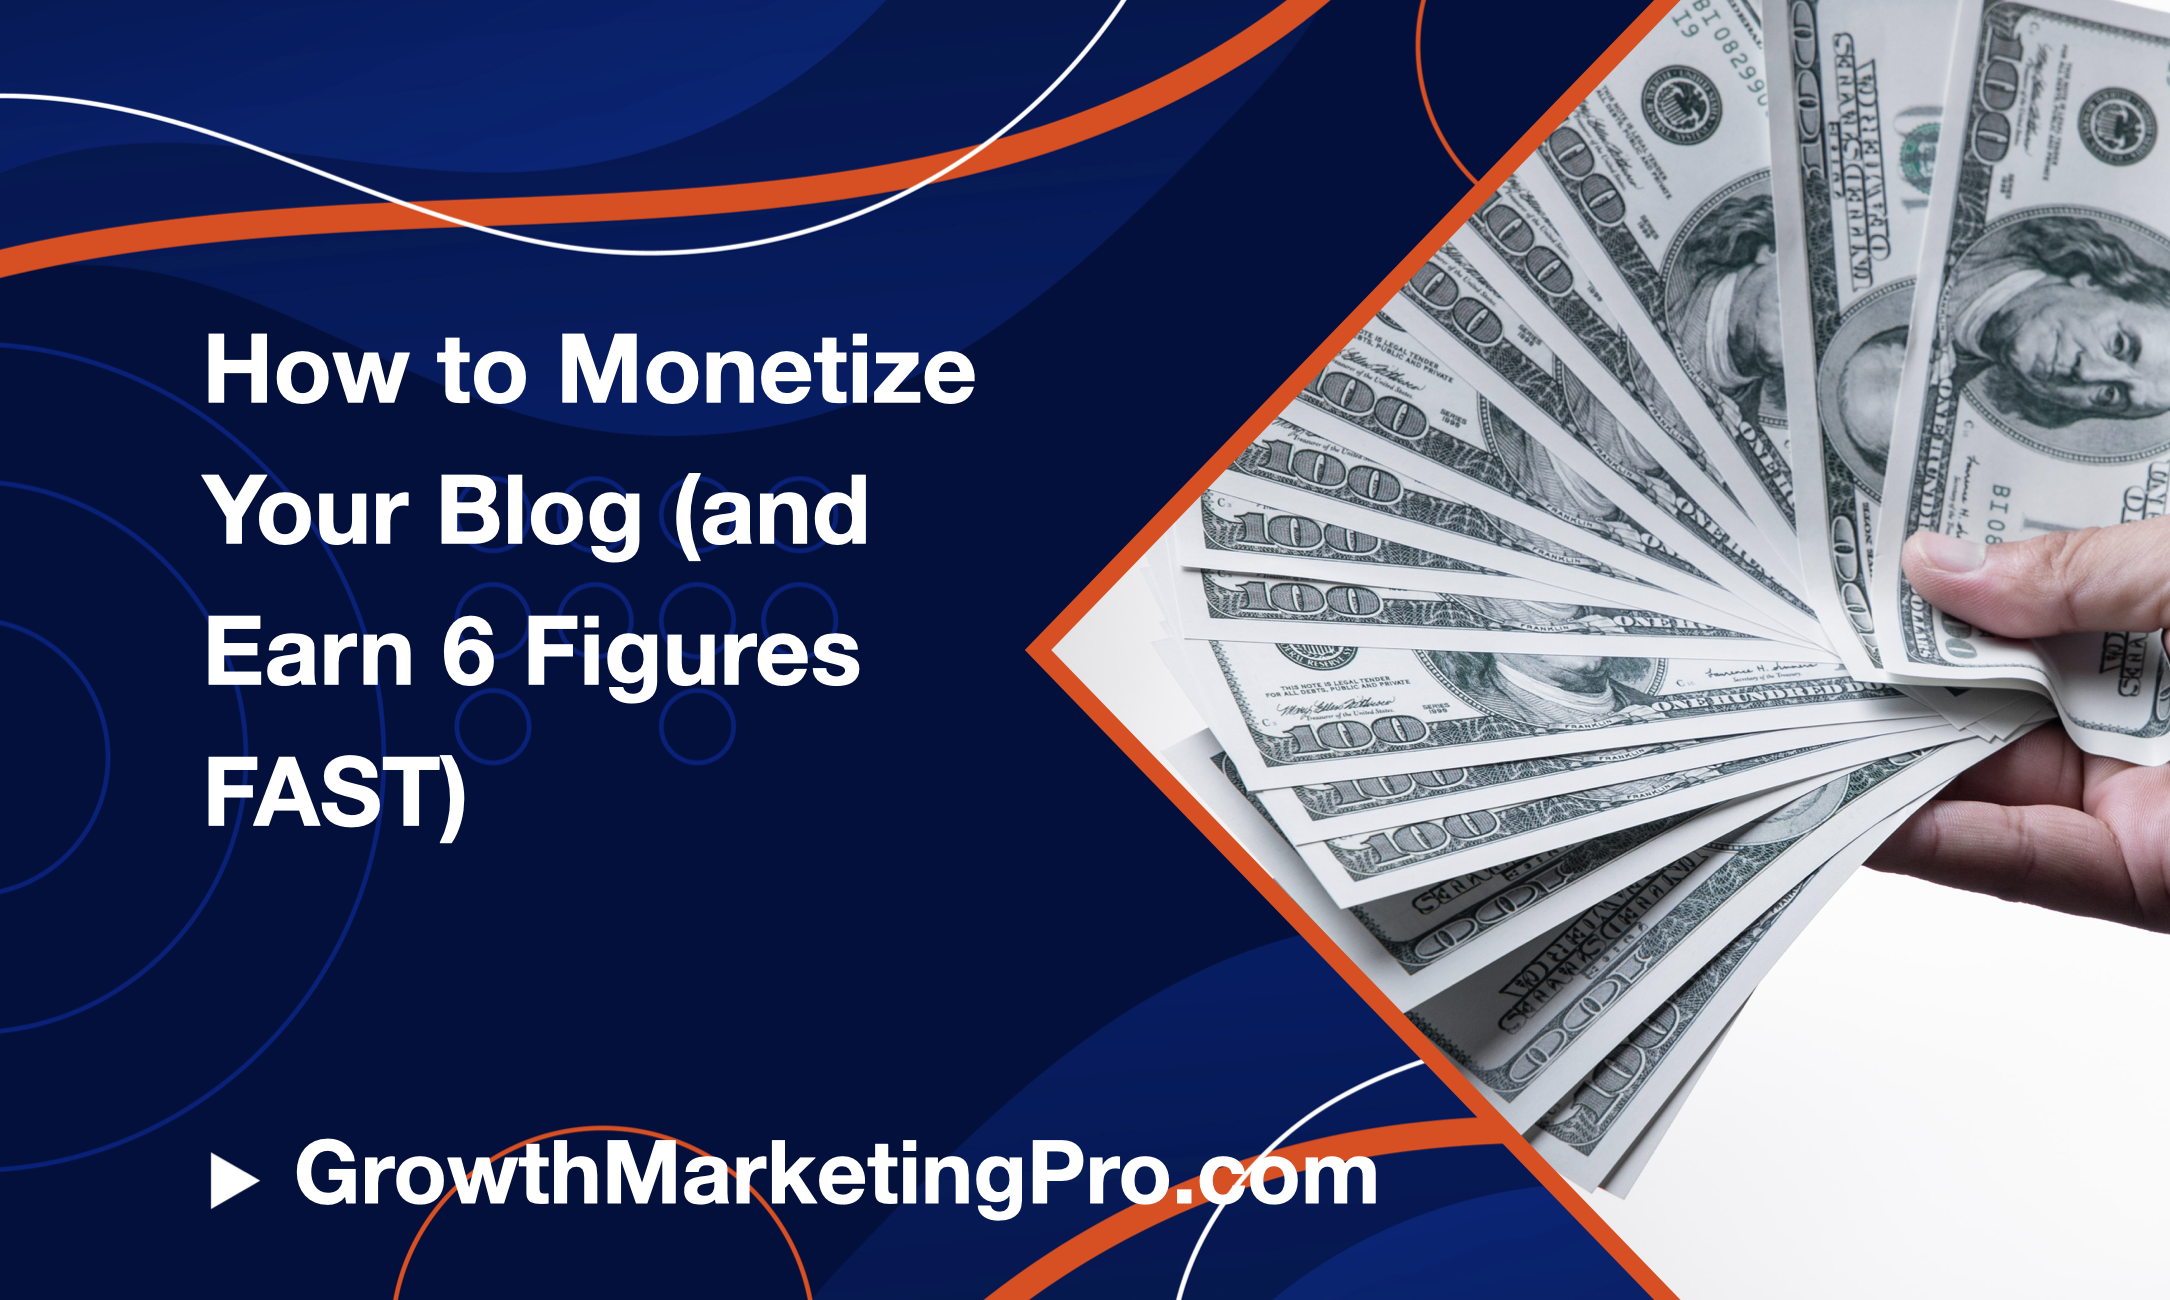 10 Tips for Monetizing Your Personal Blog and Earning Big